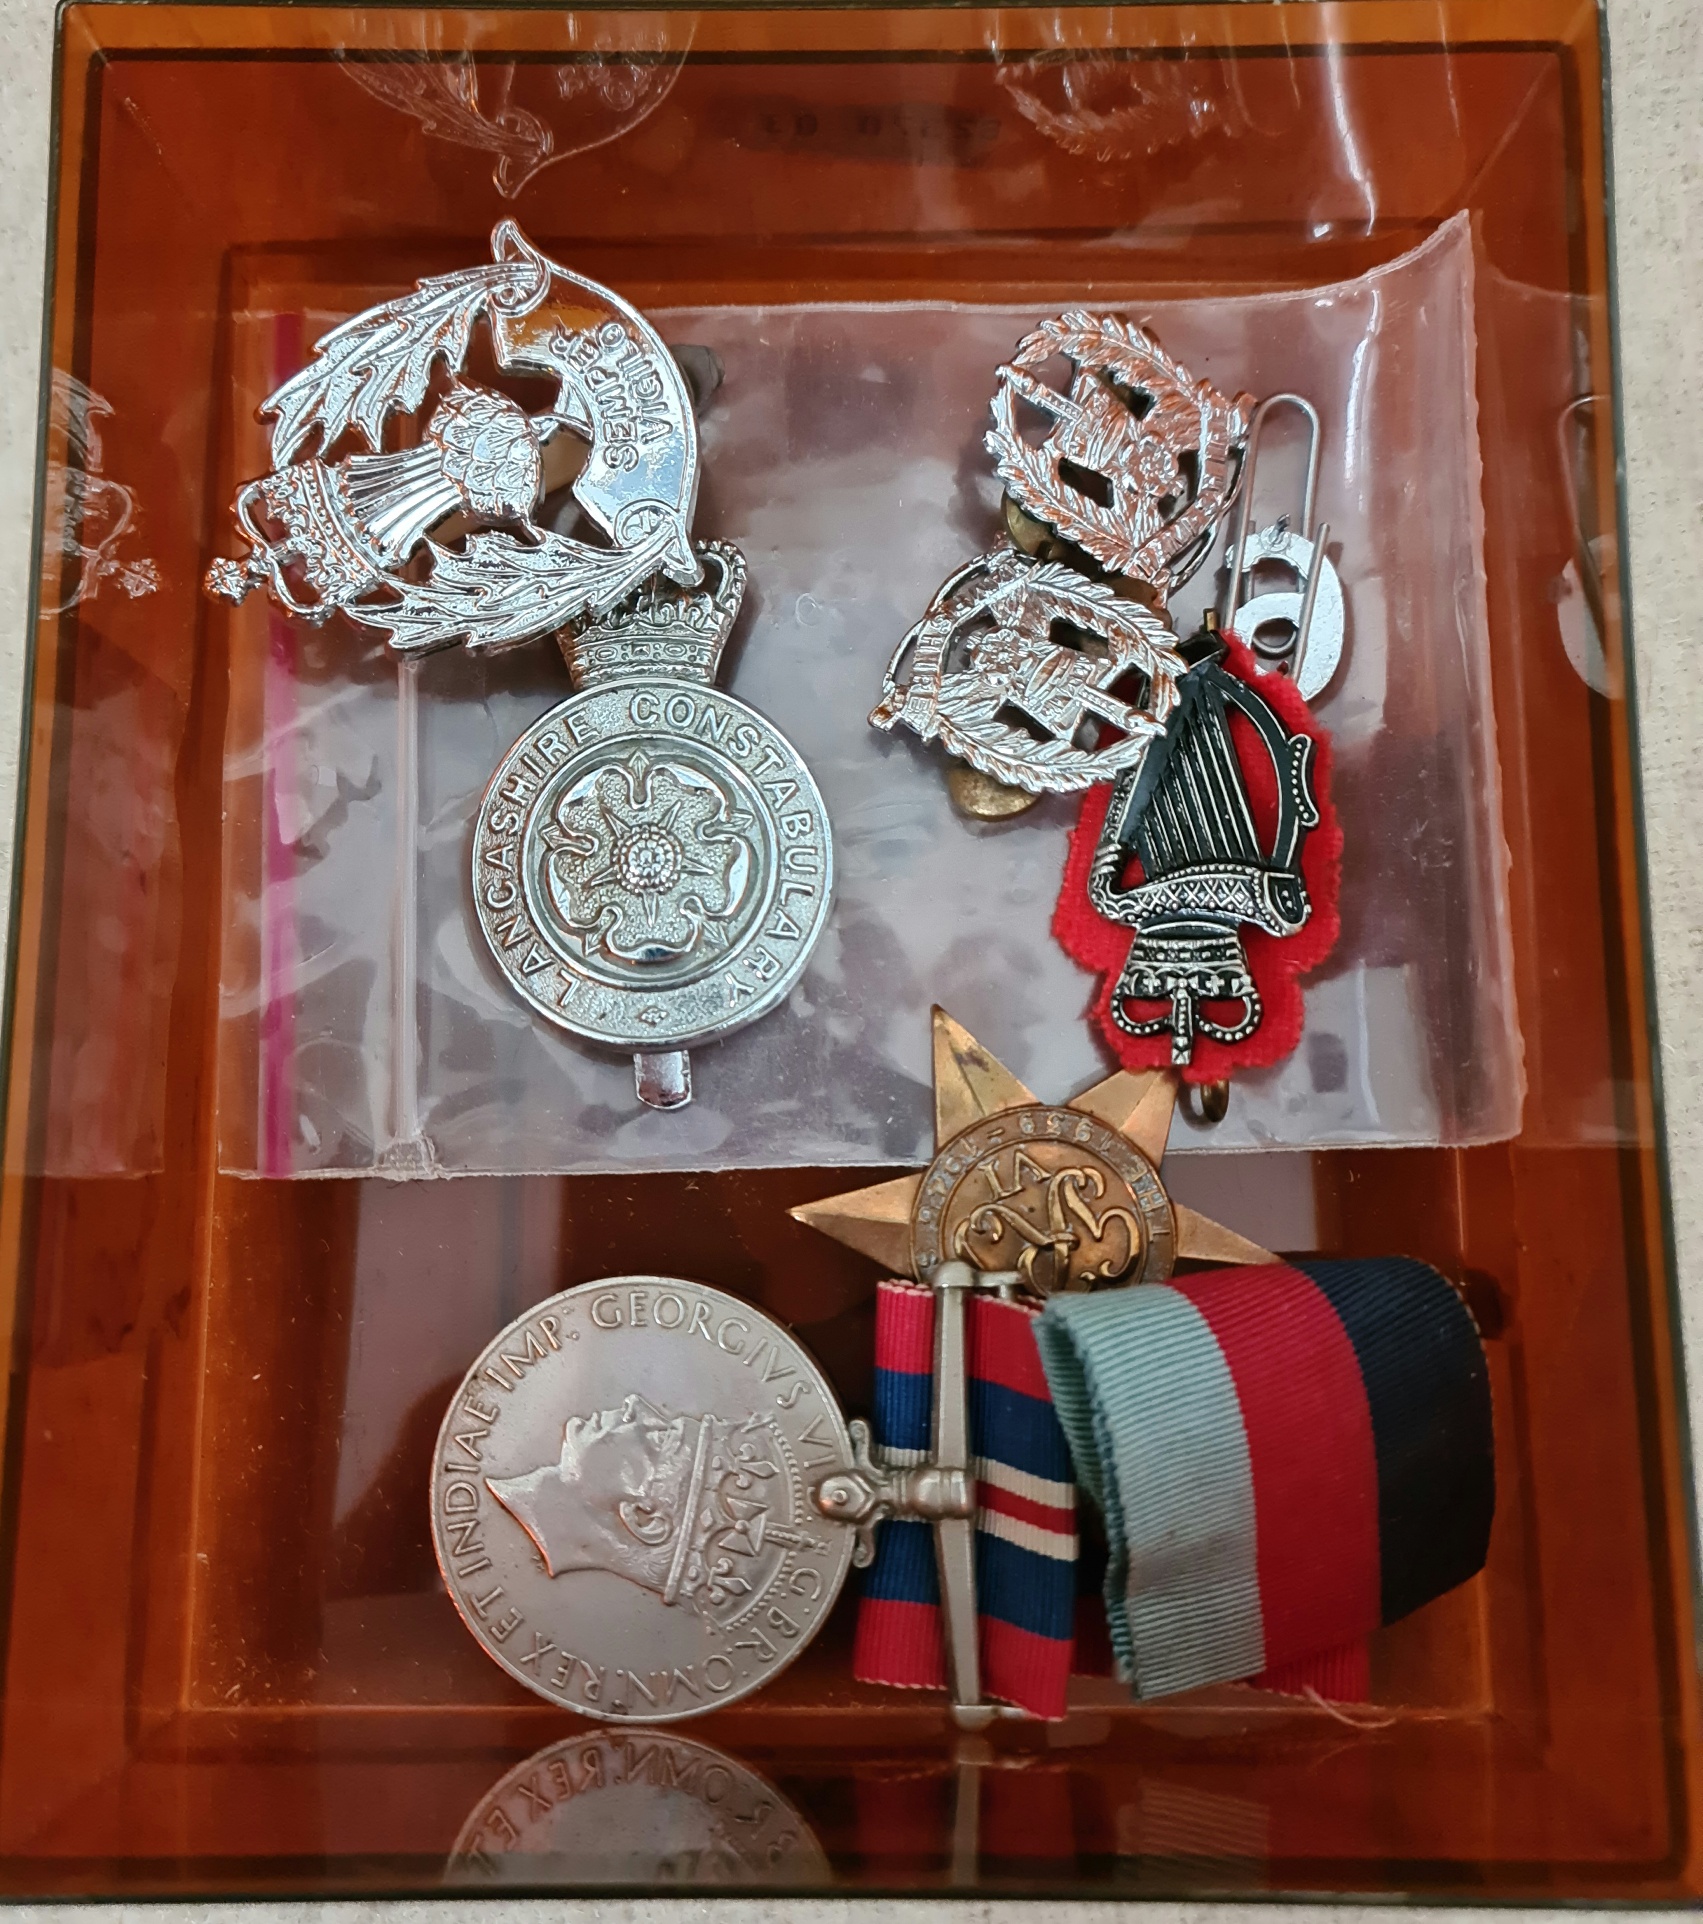 Two WW2 medals and assorted police badges.